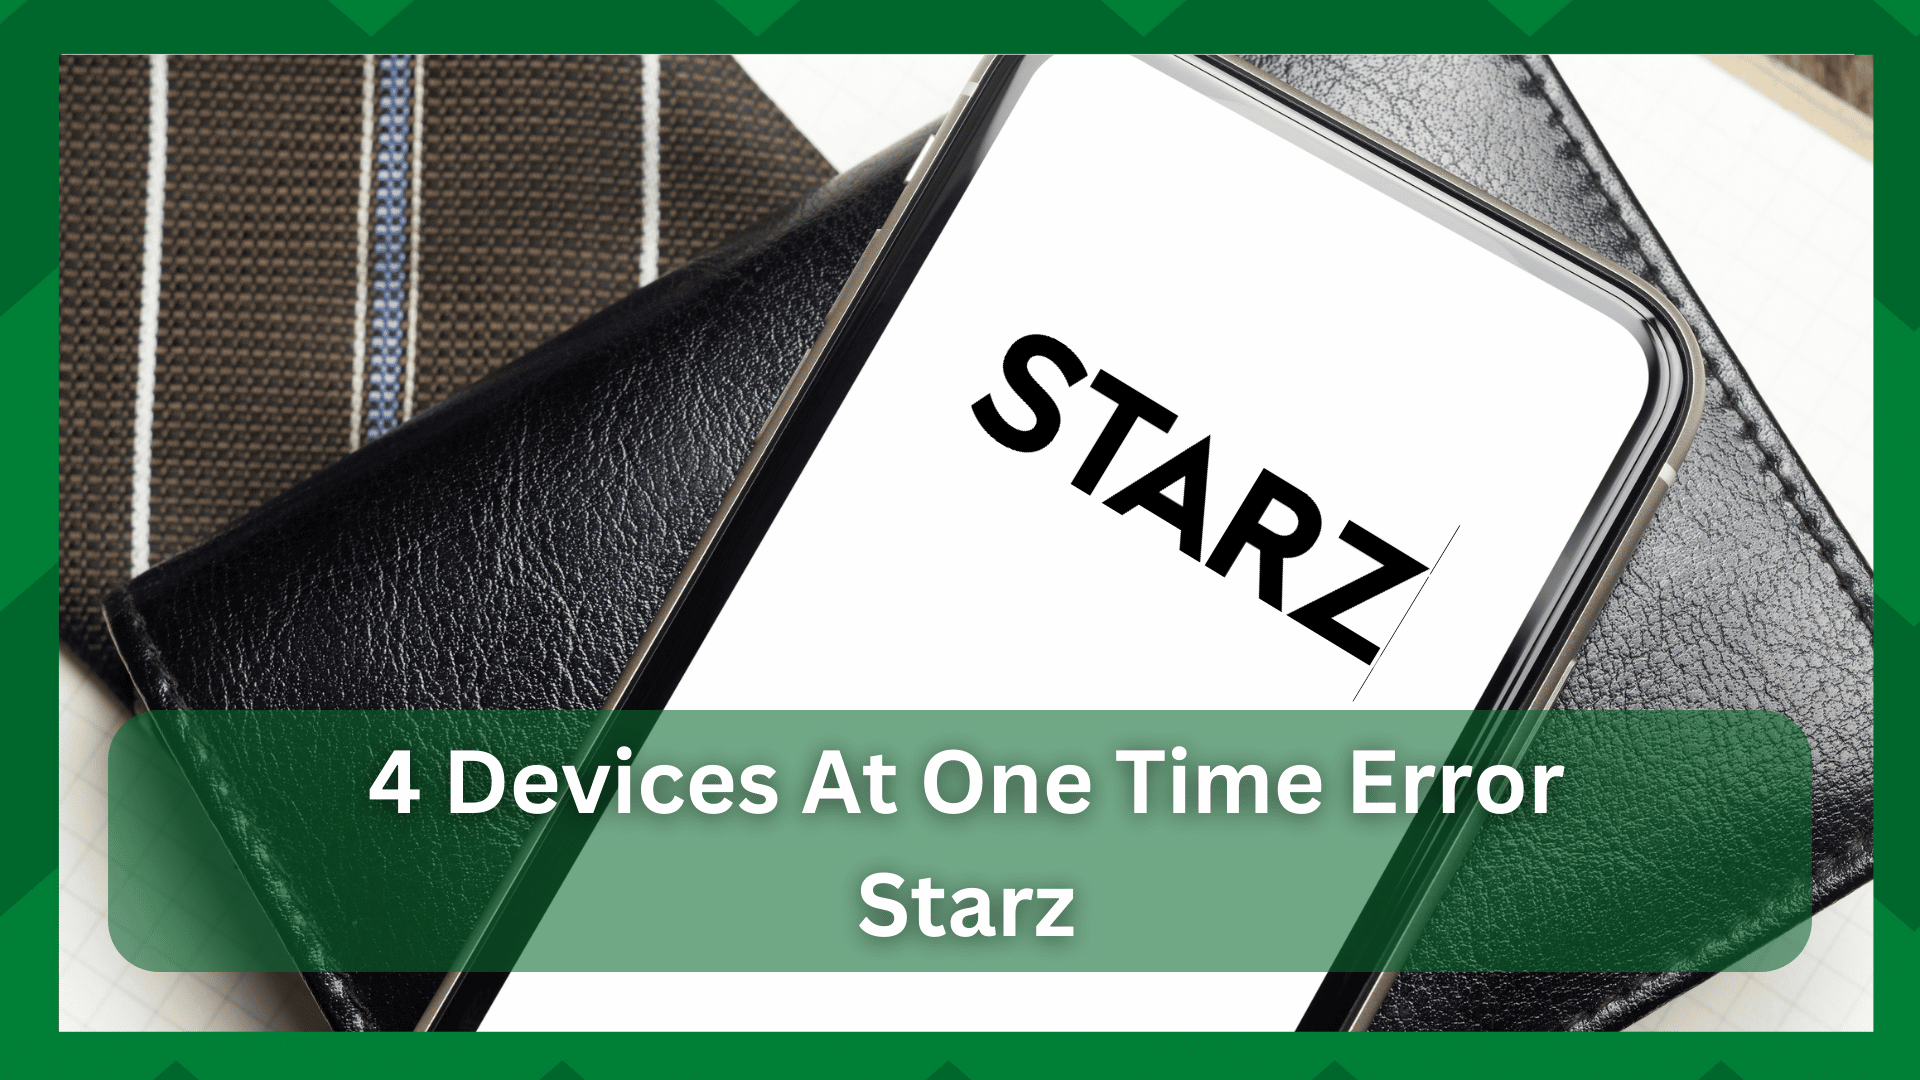 starz 4 devices at one time error